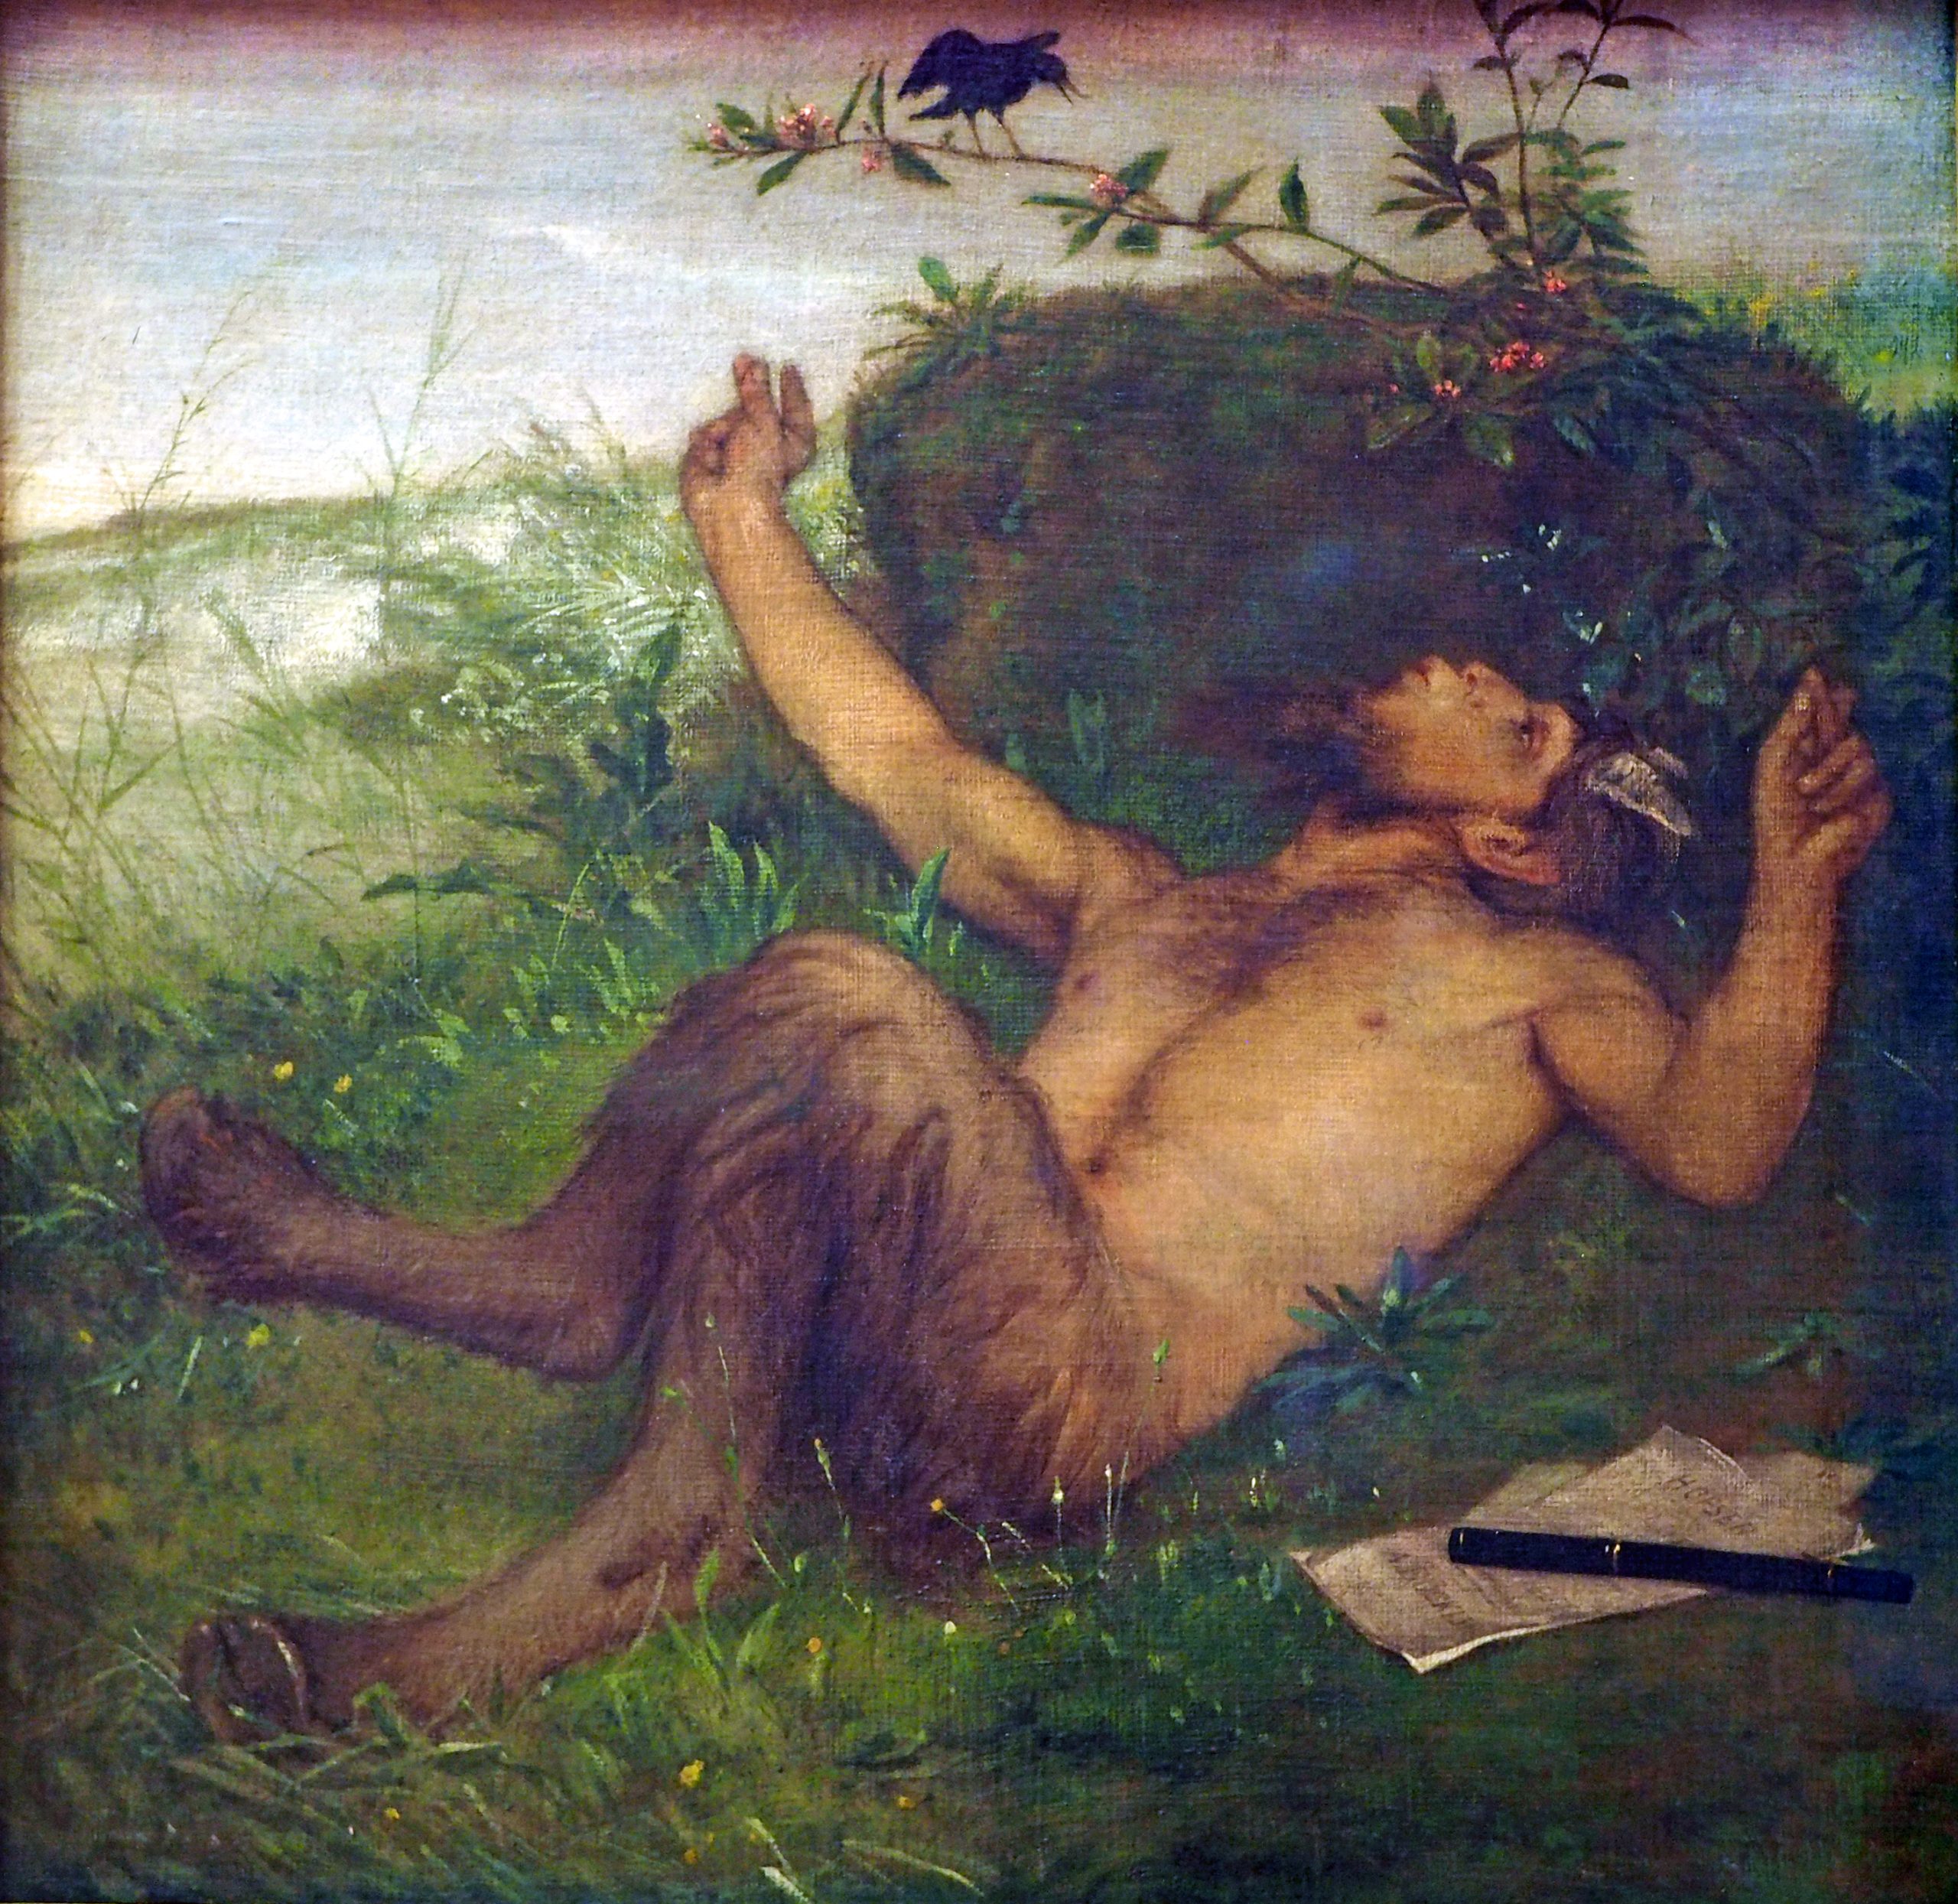 A centaur leans on the grass next to a notepad and pen while singing to a black bird above him.